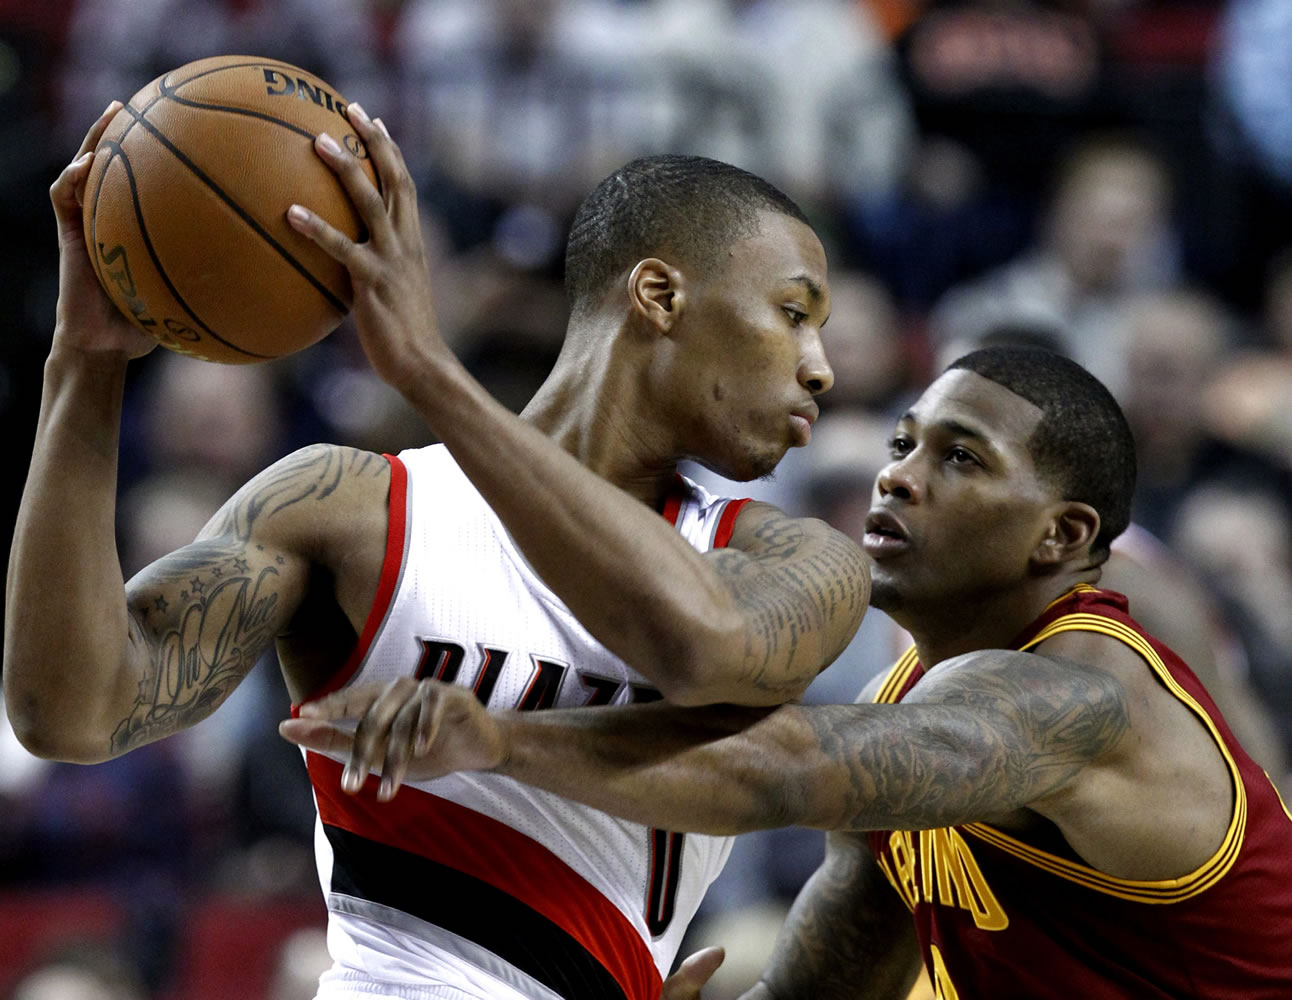 Cleveland Cavaliers forward Alonzo Gee, right, pressures Portland Trail Blazers guard Damian Lillard during the first quarter of an NBA basketball game in Portland, Ore., Wednesday, Jan. 16, 2013.